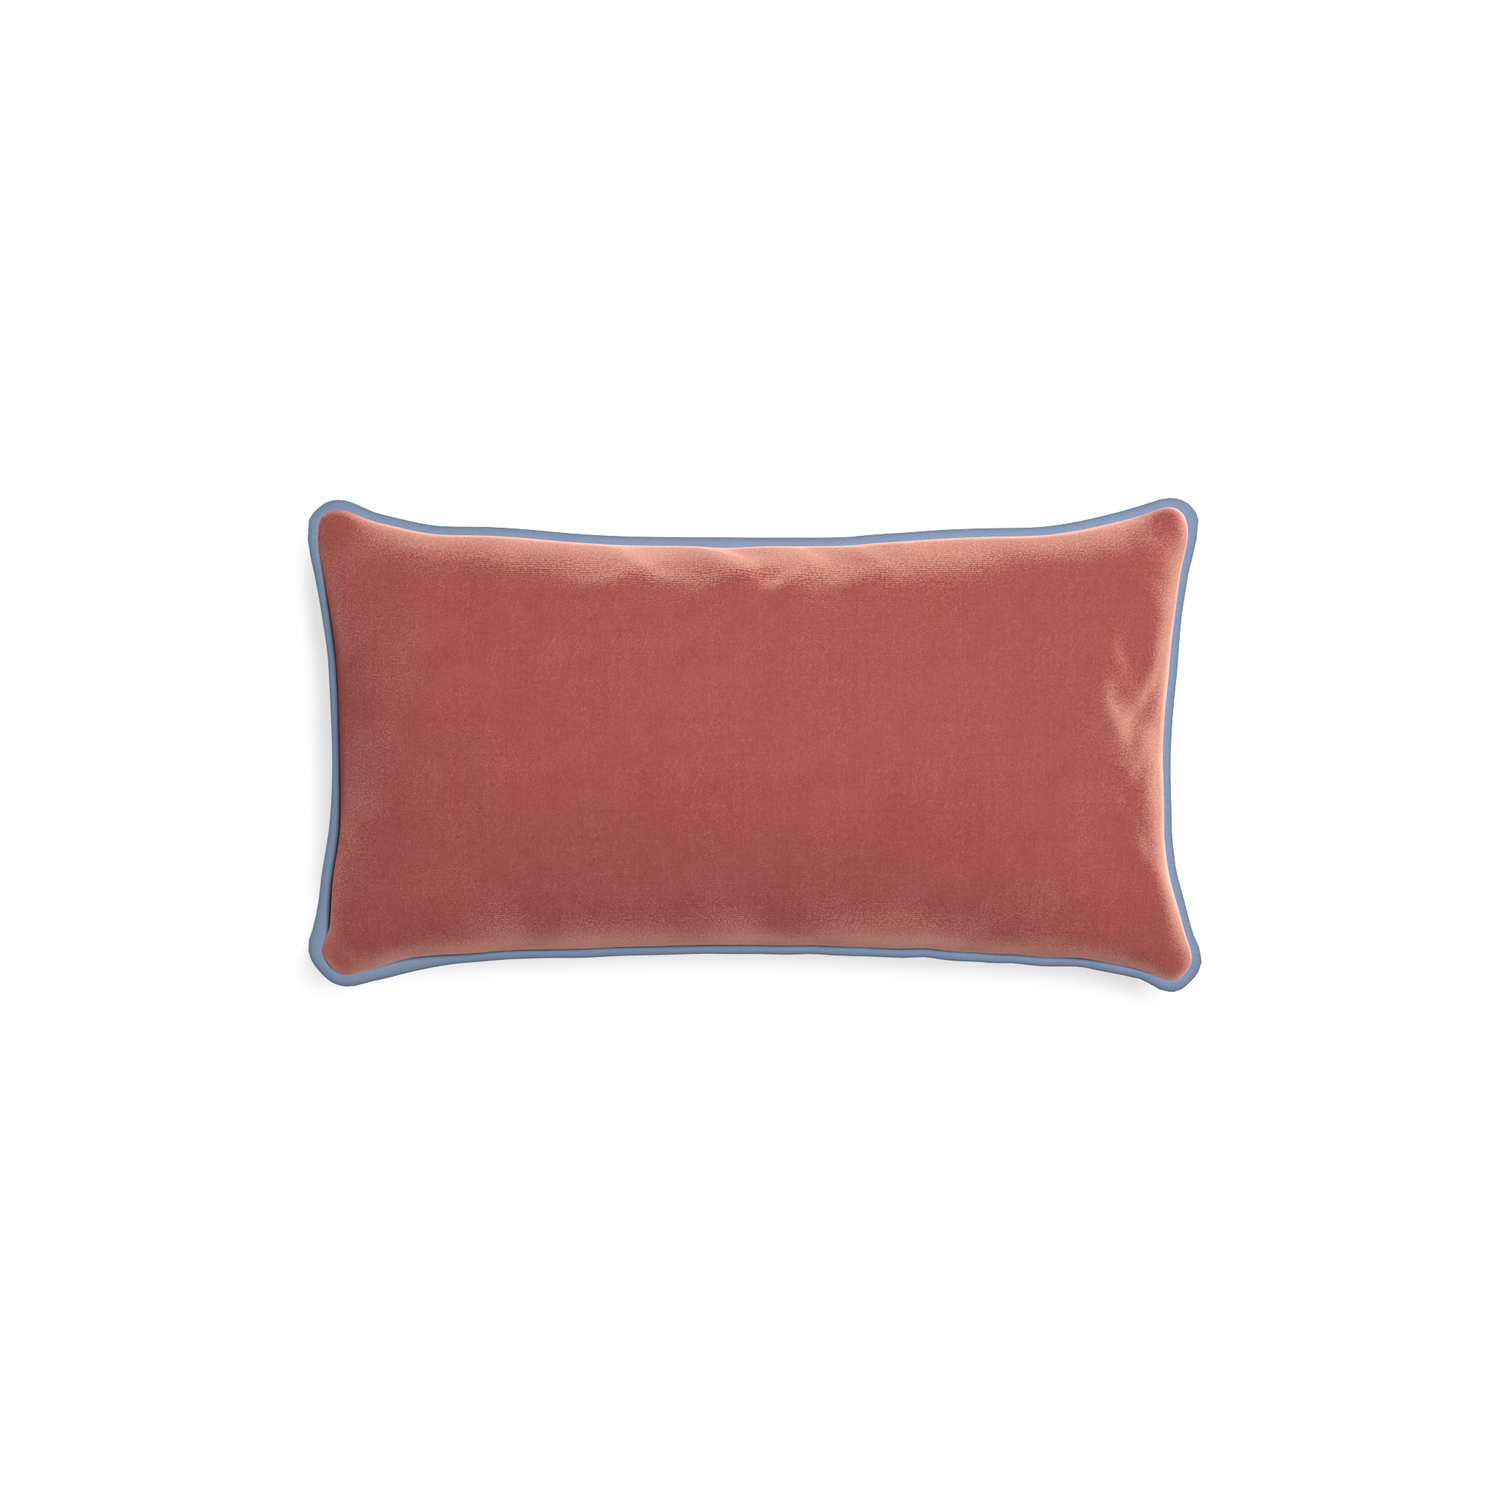 rectangle coral velvet pillow with sky blue piping